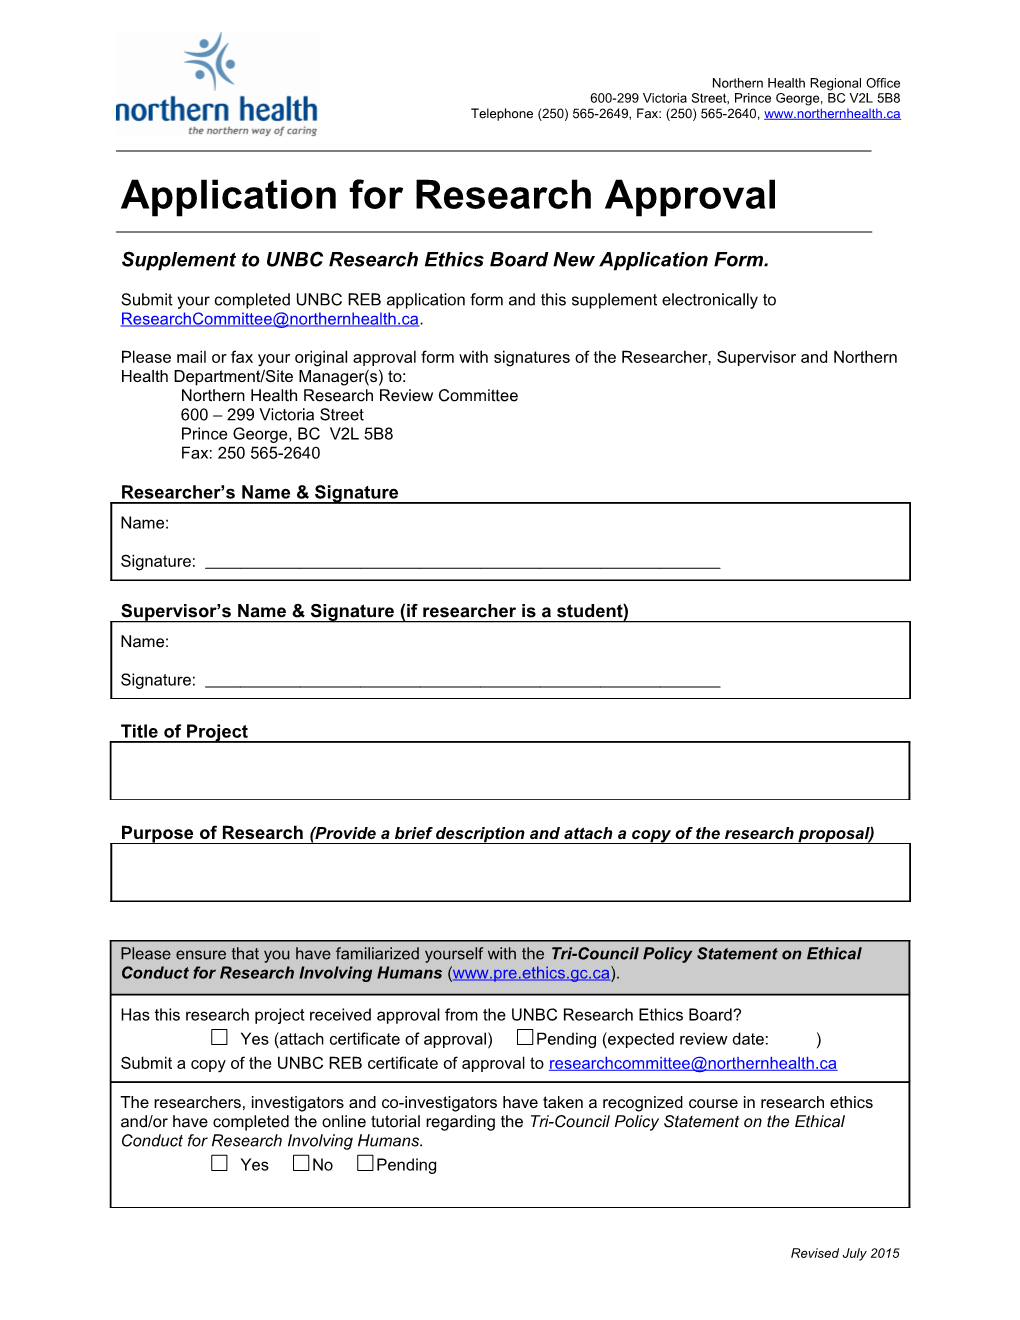 Supplement to UNBC Research Ethics Board New Application Form